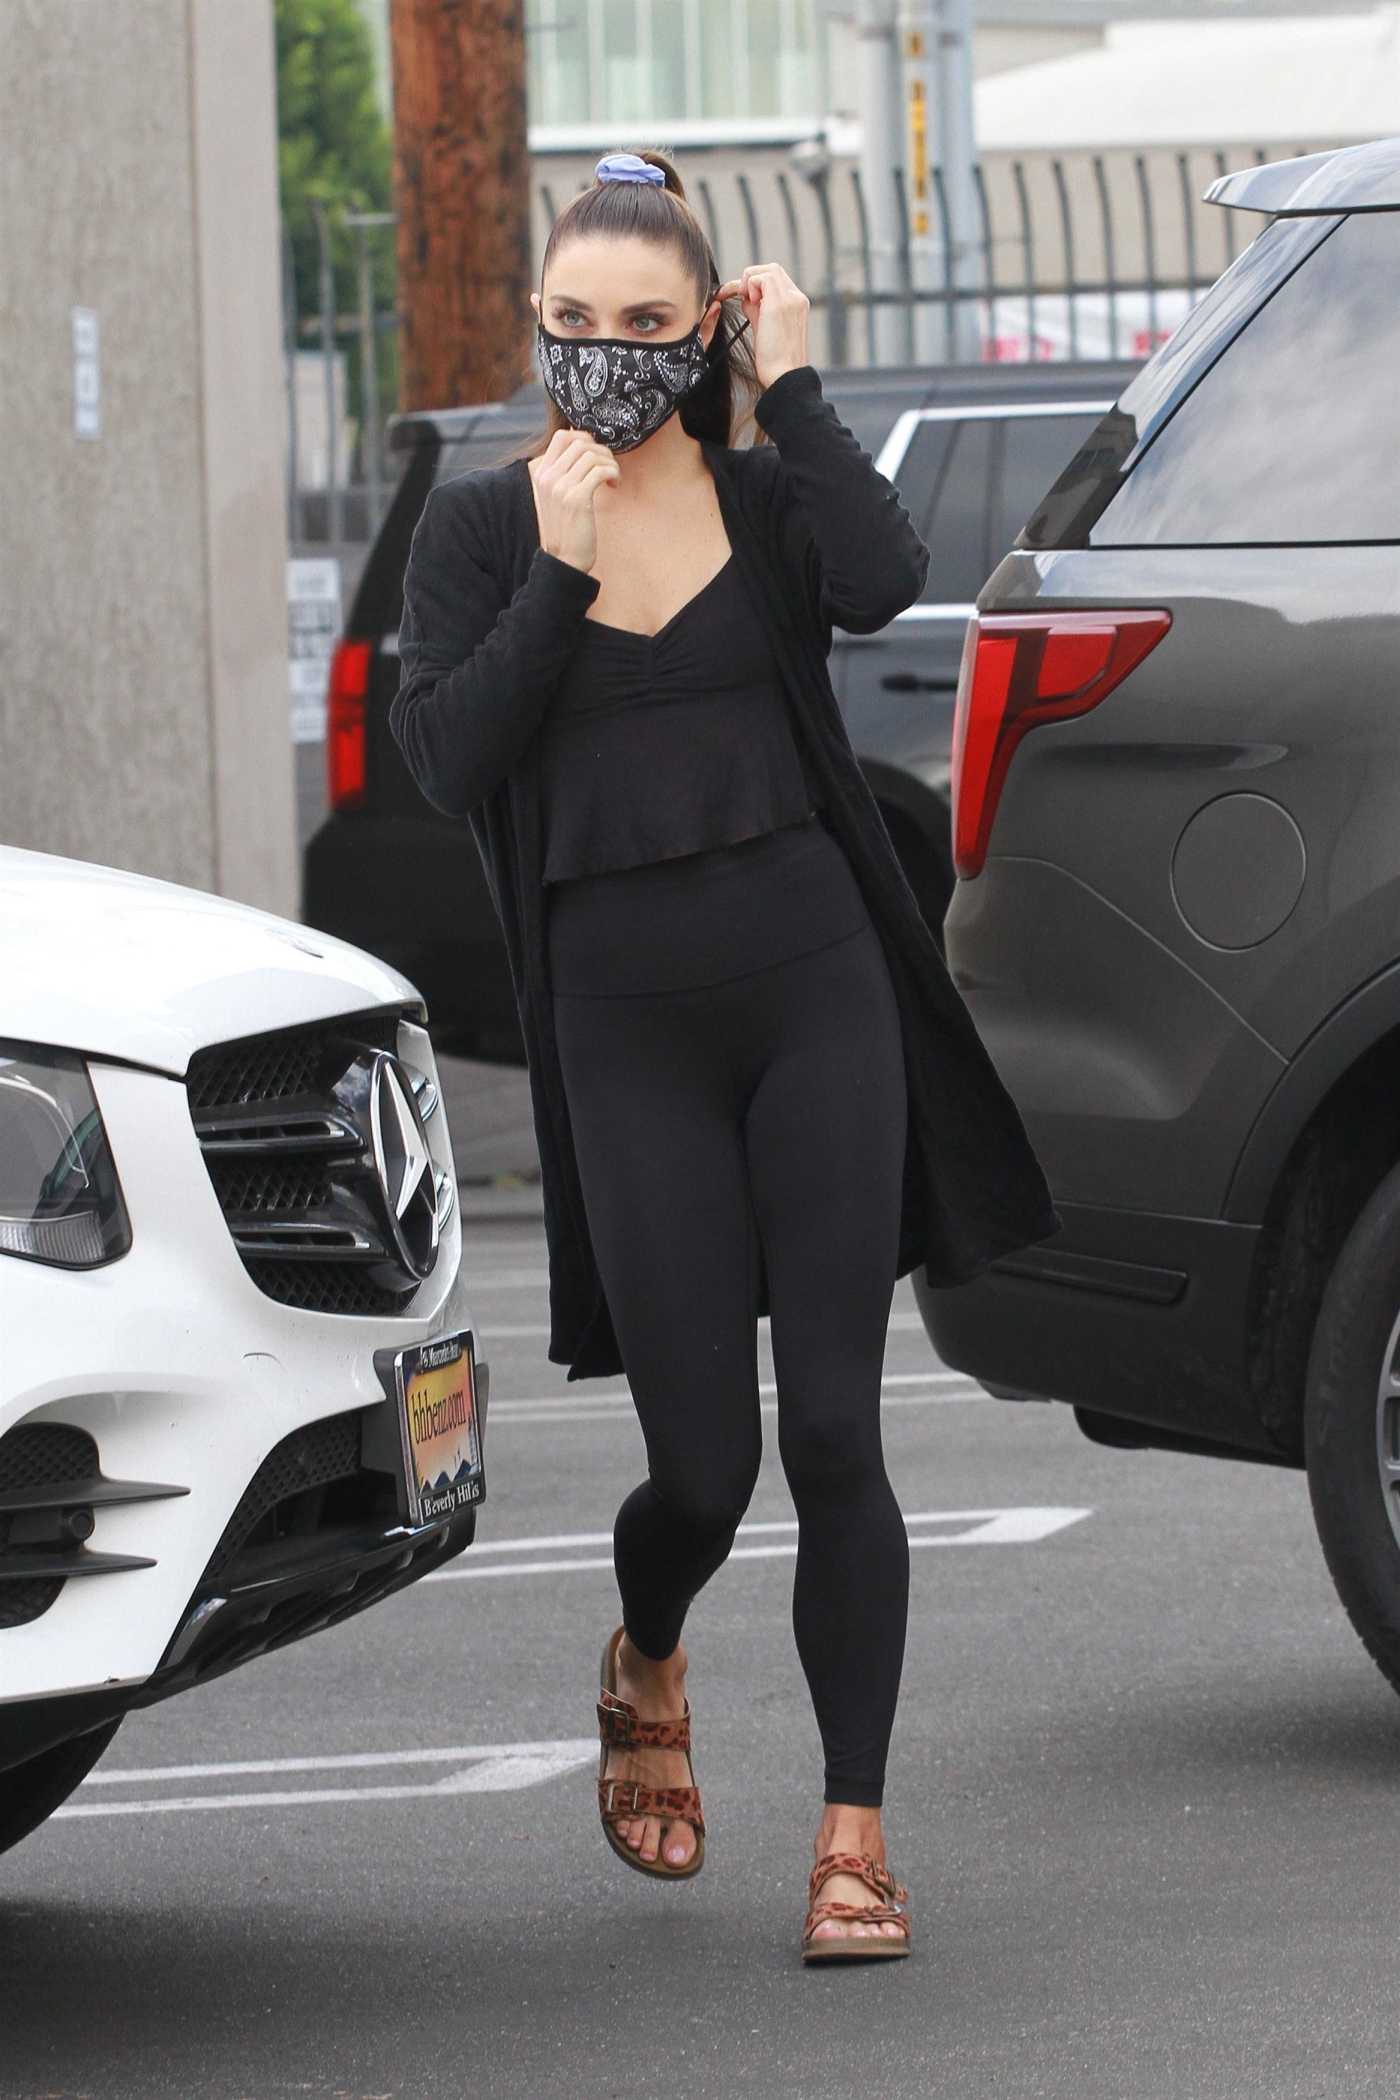 Jenna Johnson in a Black Leggings Arrives at the DWTS Studio in Los Angeles 11/01/2020